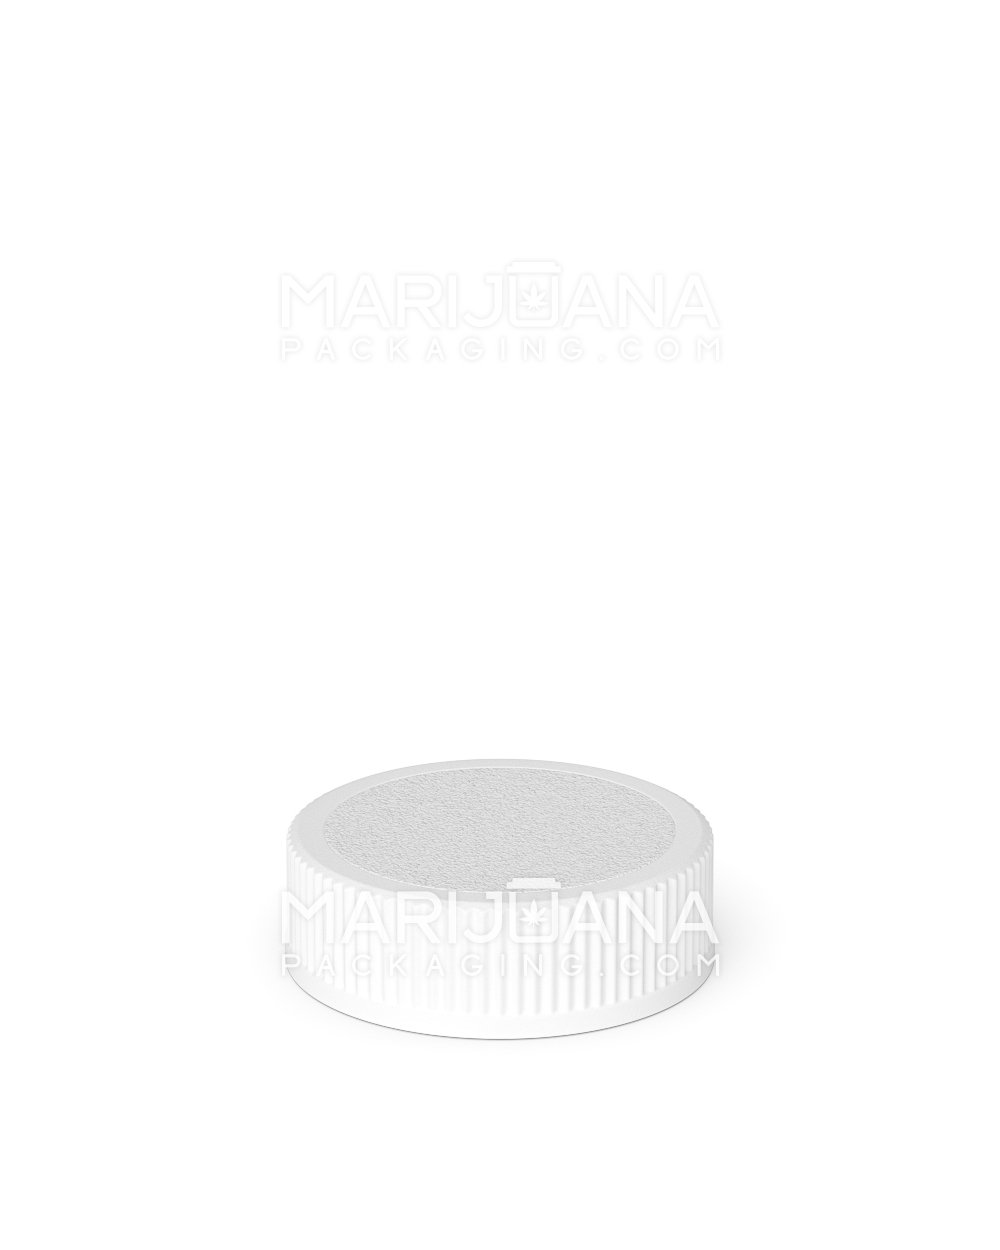 Glass Concentrate Containers with White Cap | 28mm - 5mL - 250 Count - 6